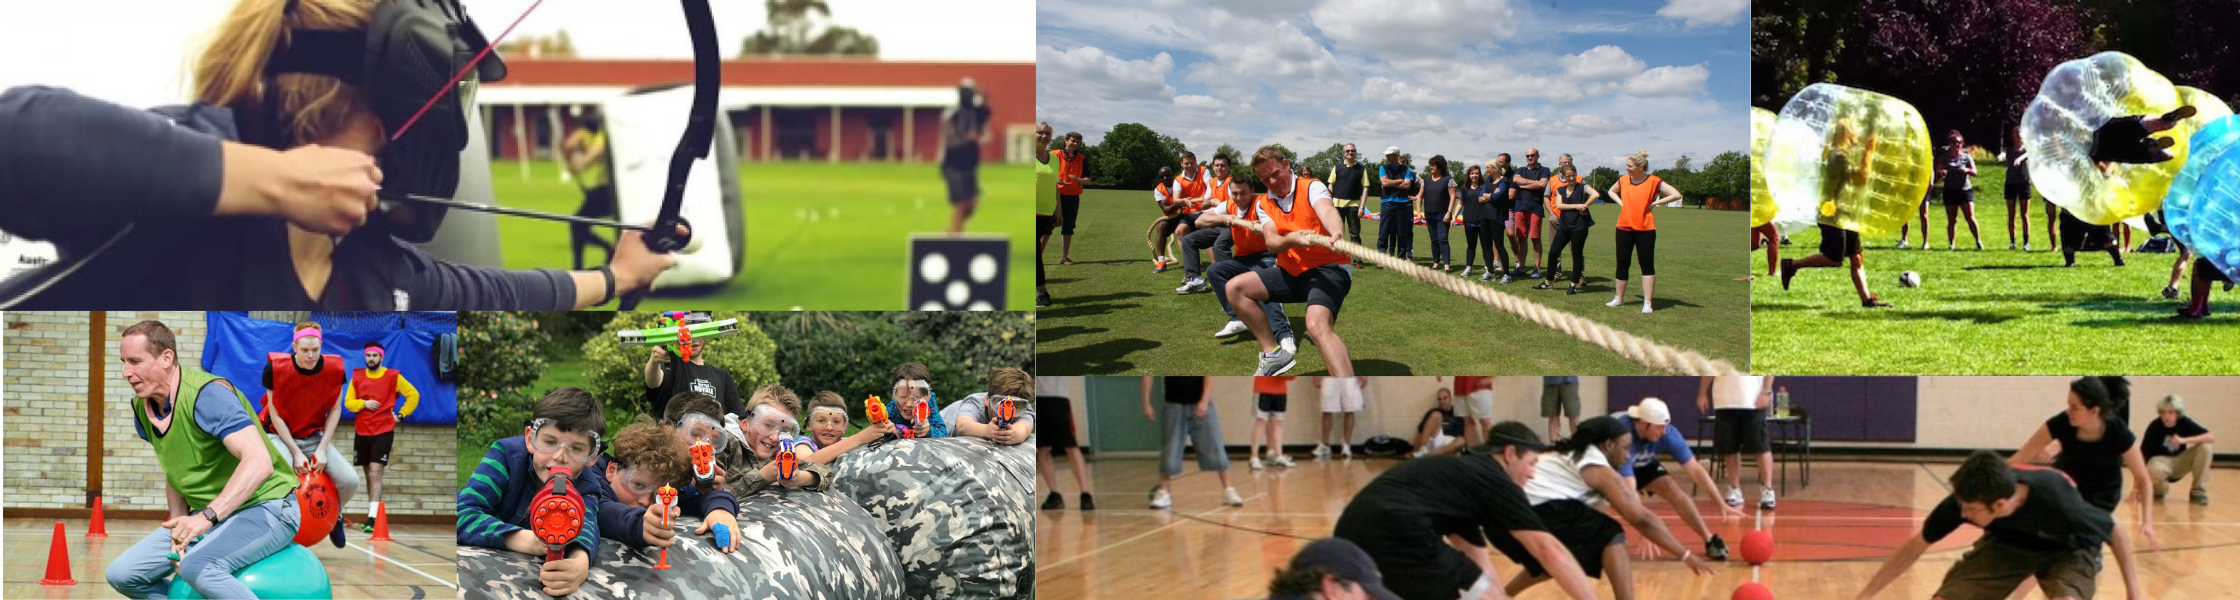 Archery tag, nerf and bubble football parties